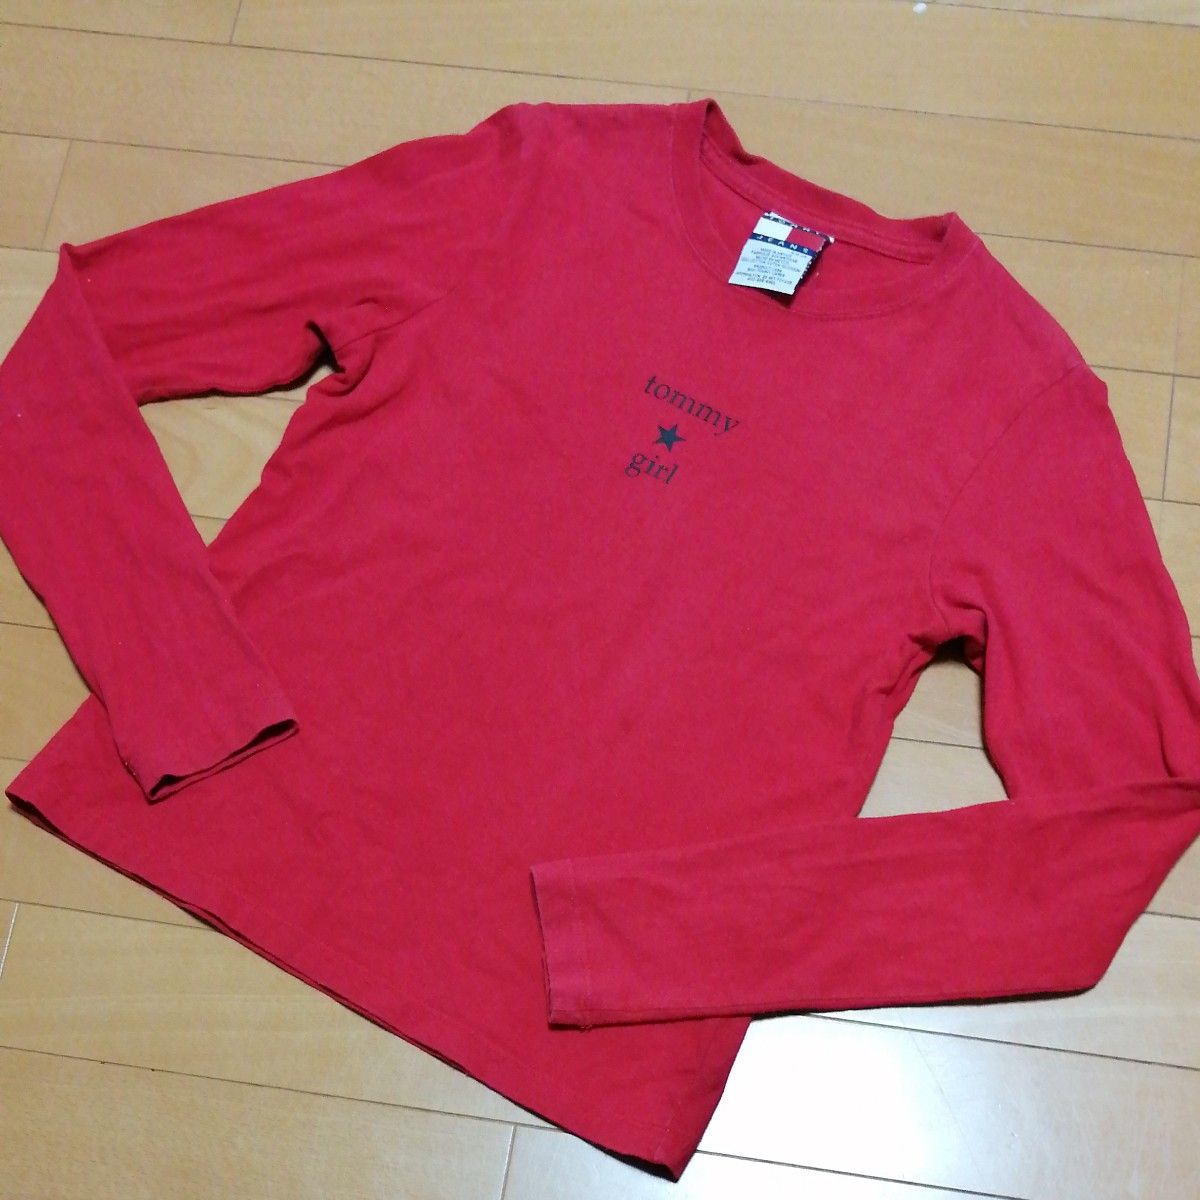 TOMMY JEANS★ 長袖 Tシャツ tommy girl カットソー　Sサイズ　赤色　 トップス